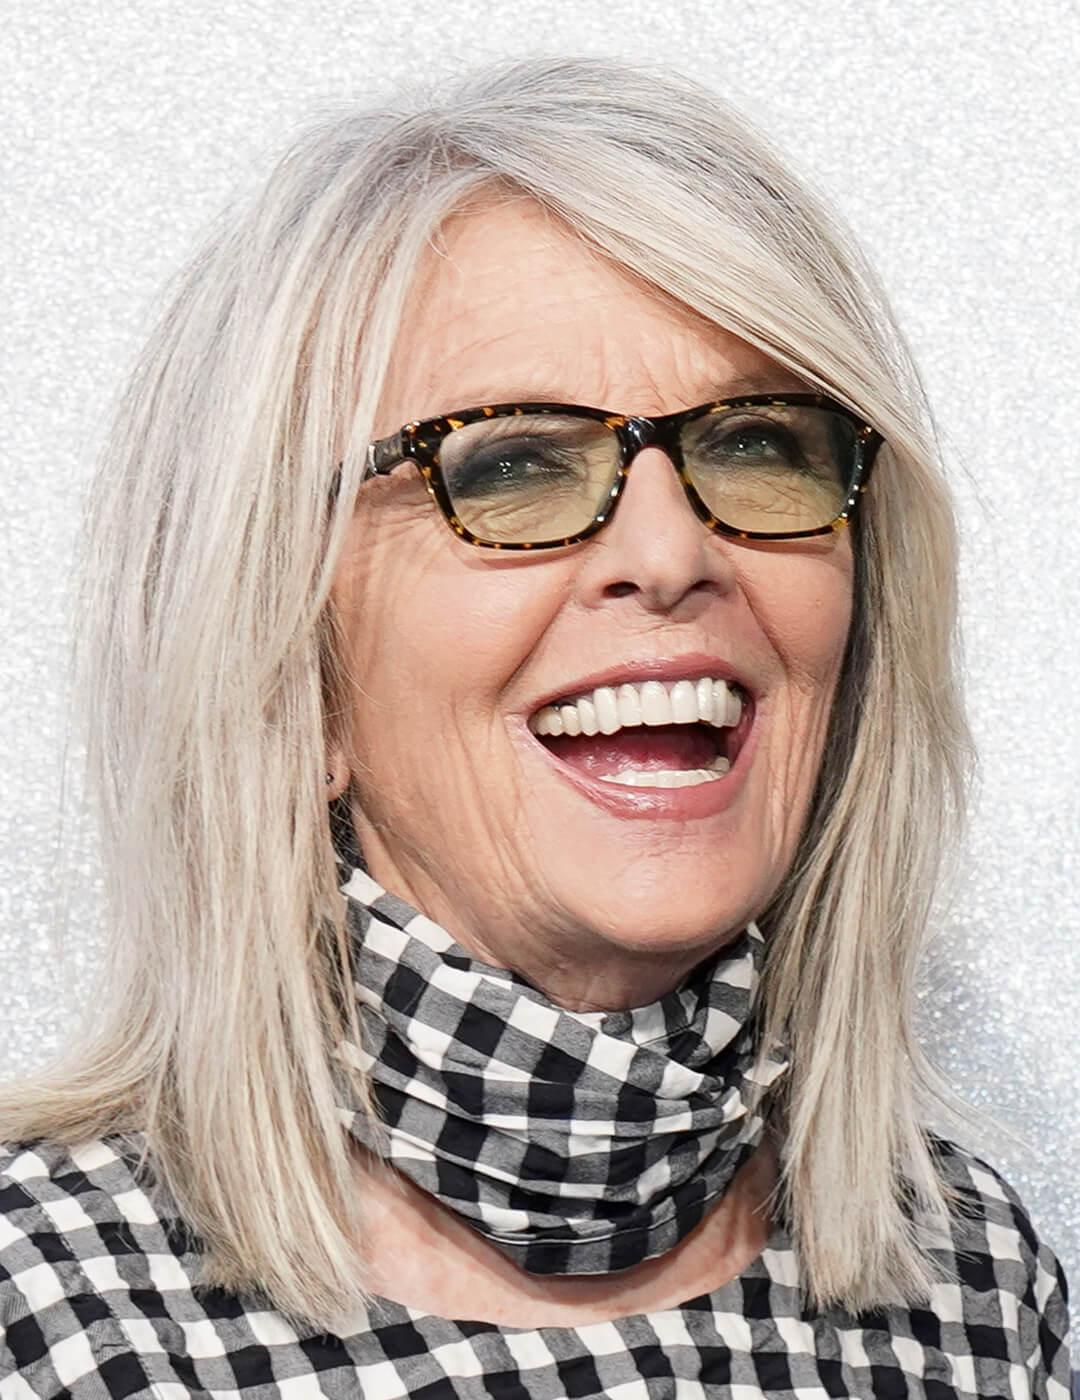 A photo of Diane Keaton wearing glasses with a multi-dimensional gray layers hairstyle